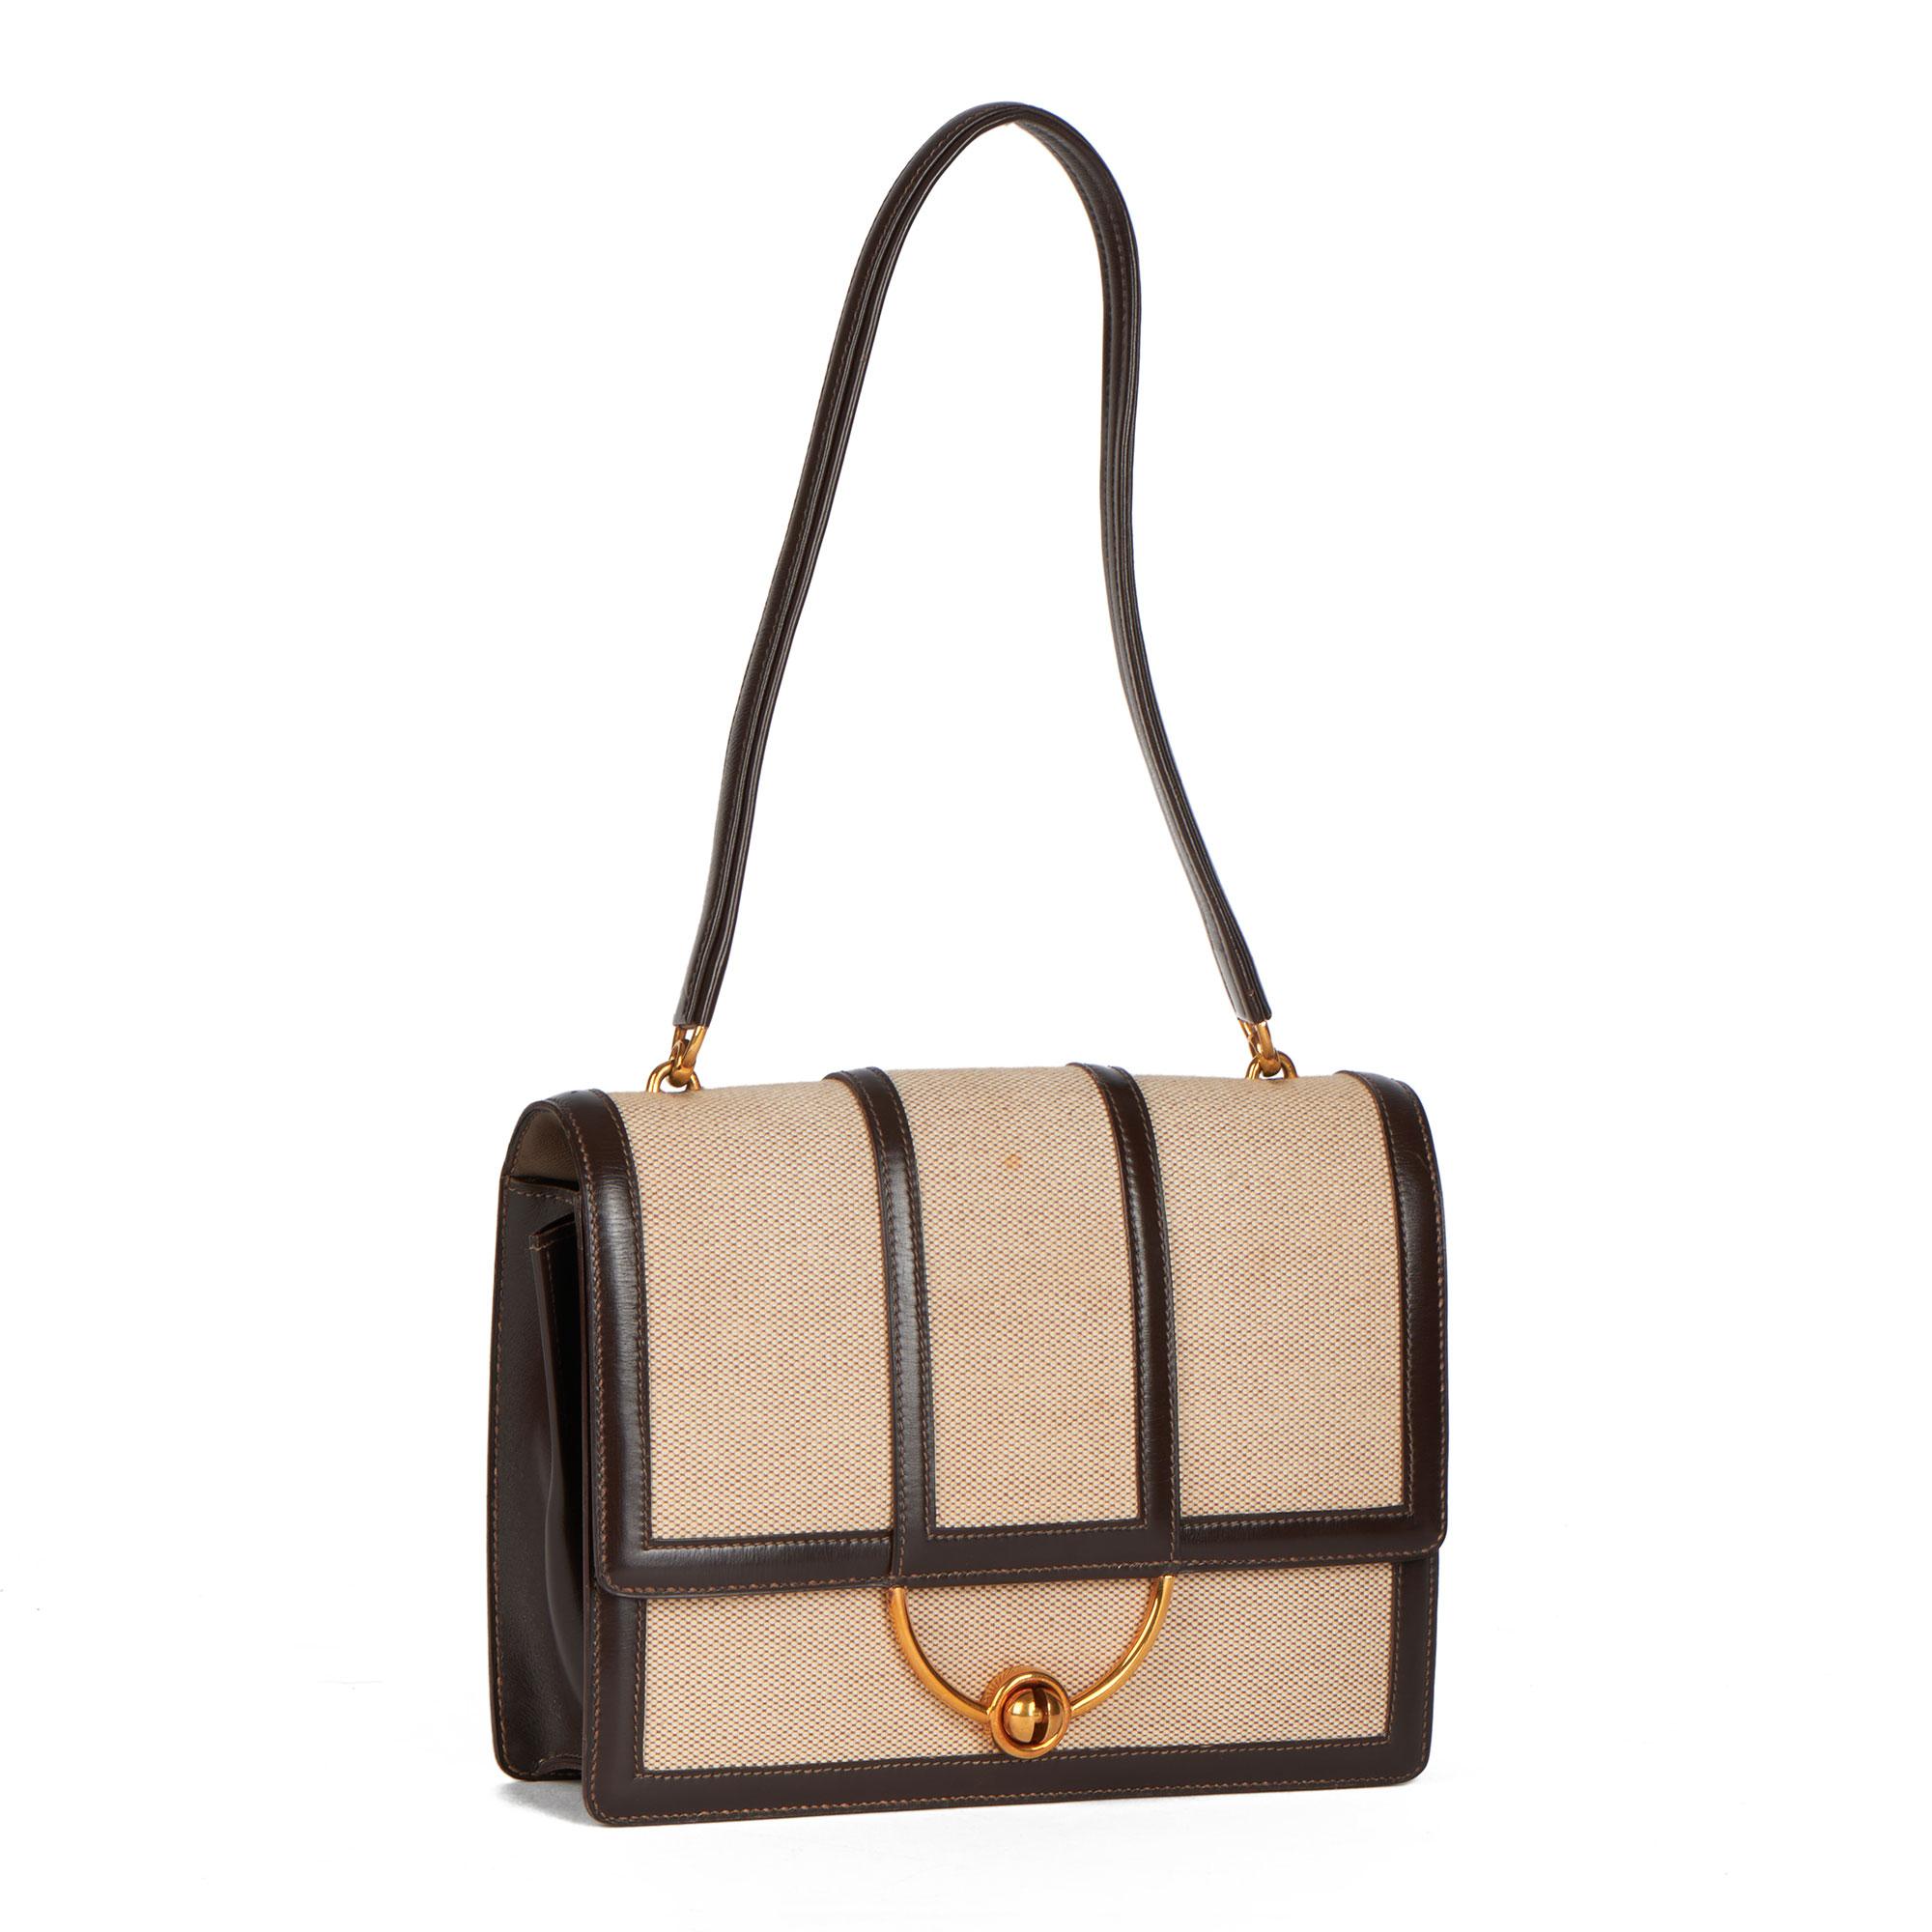 HERMÈS
Brown Box Calf Leather & Beige Canvas Vintage Ring Flap Bag

Xupes Reference: CB380
Serial Number: (B)
Age (Circa): 1972
Authenticity Details: Date Stamp (Made in  France)
Gender: Ladies
Type: Top Handle, Shoulder

Colour: Brown
Hardware: